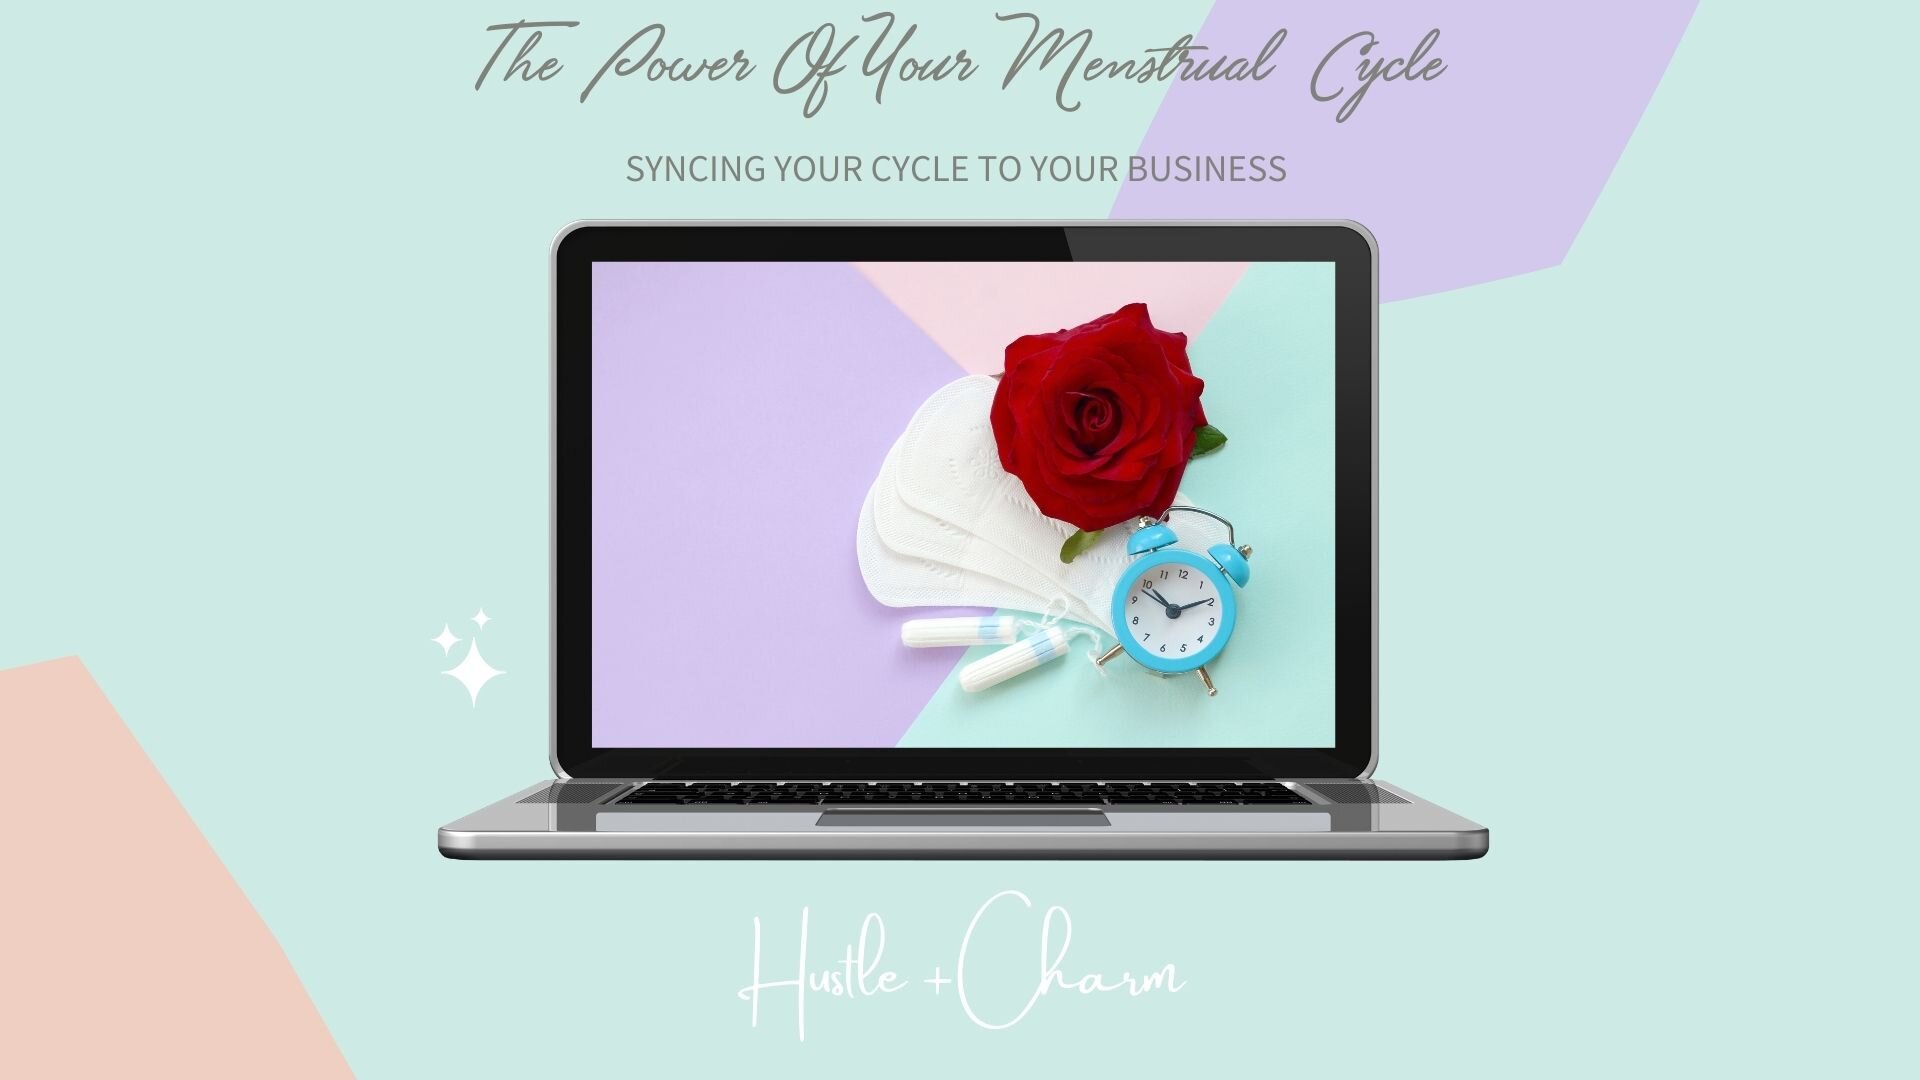 Copy of The Power Of Your Menstrual  Cycle  Syncing your cycle to your business.jpg